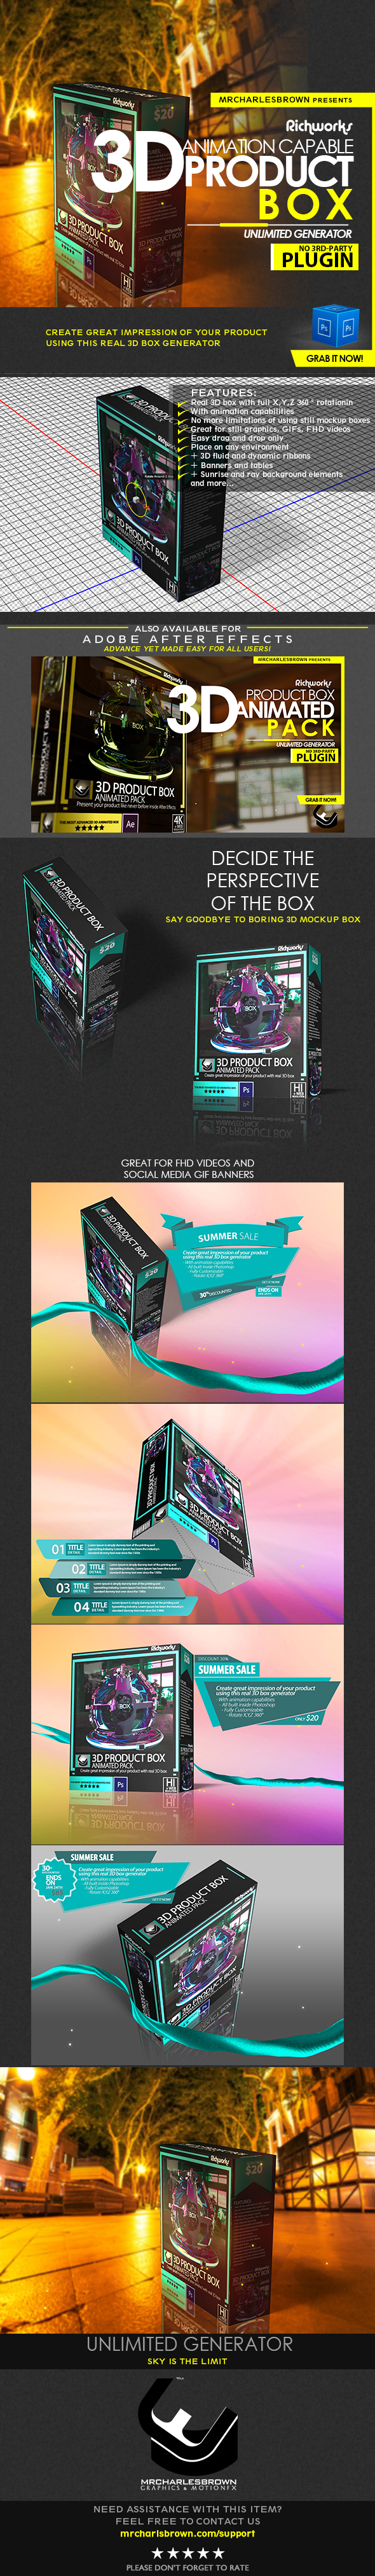  Richworks 3D Product Box For Photoshop 